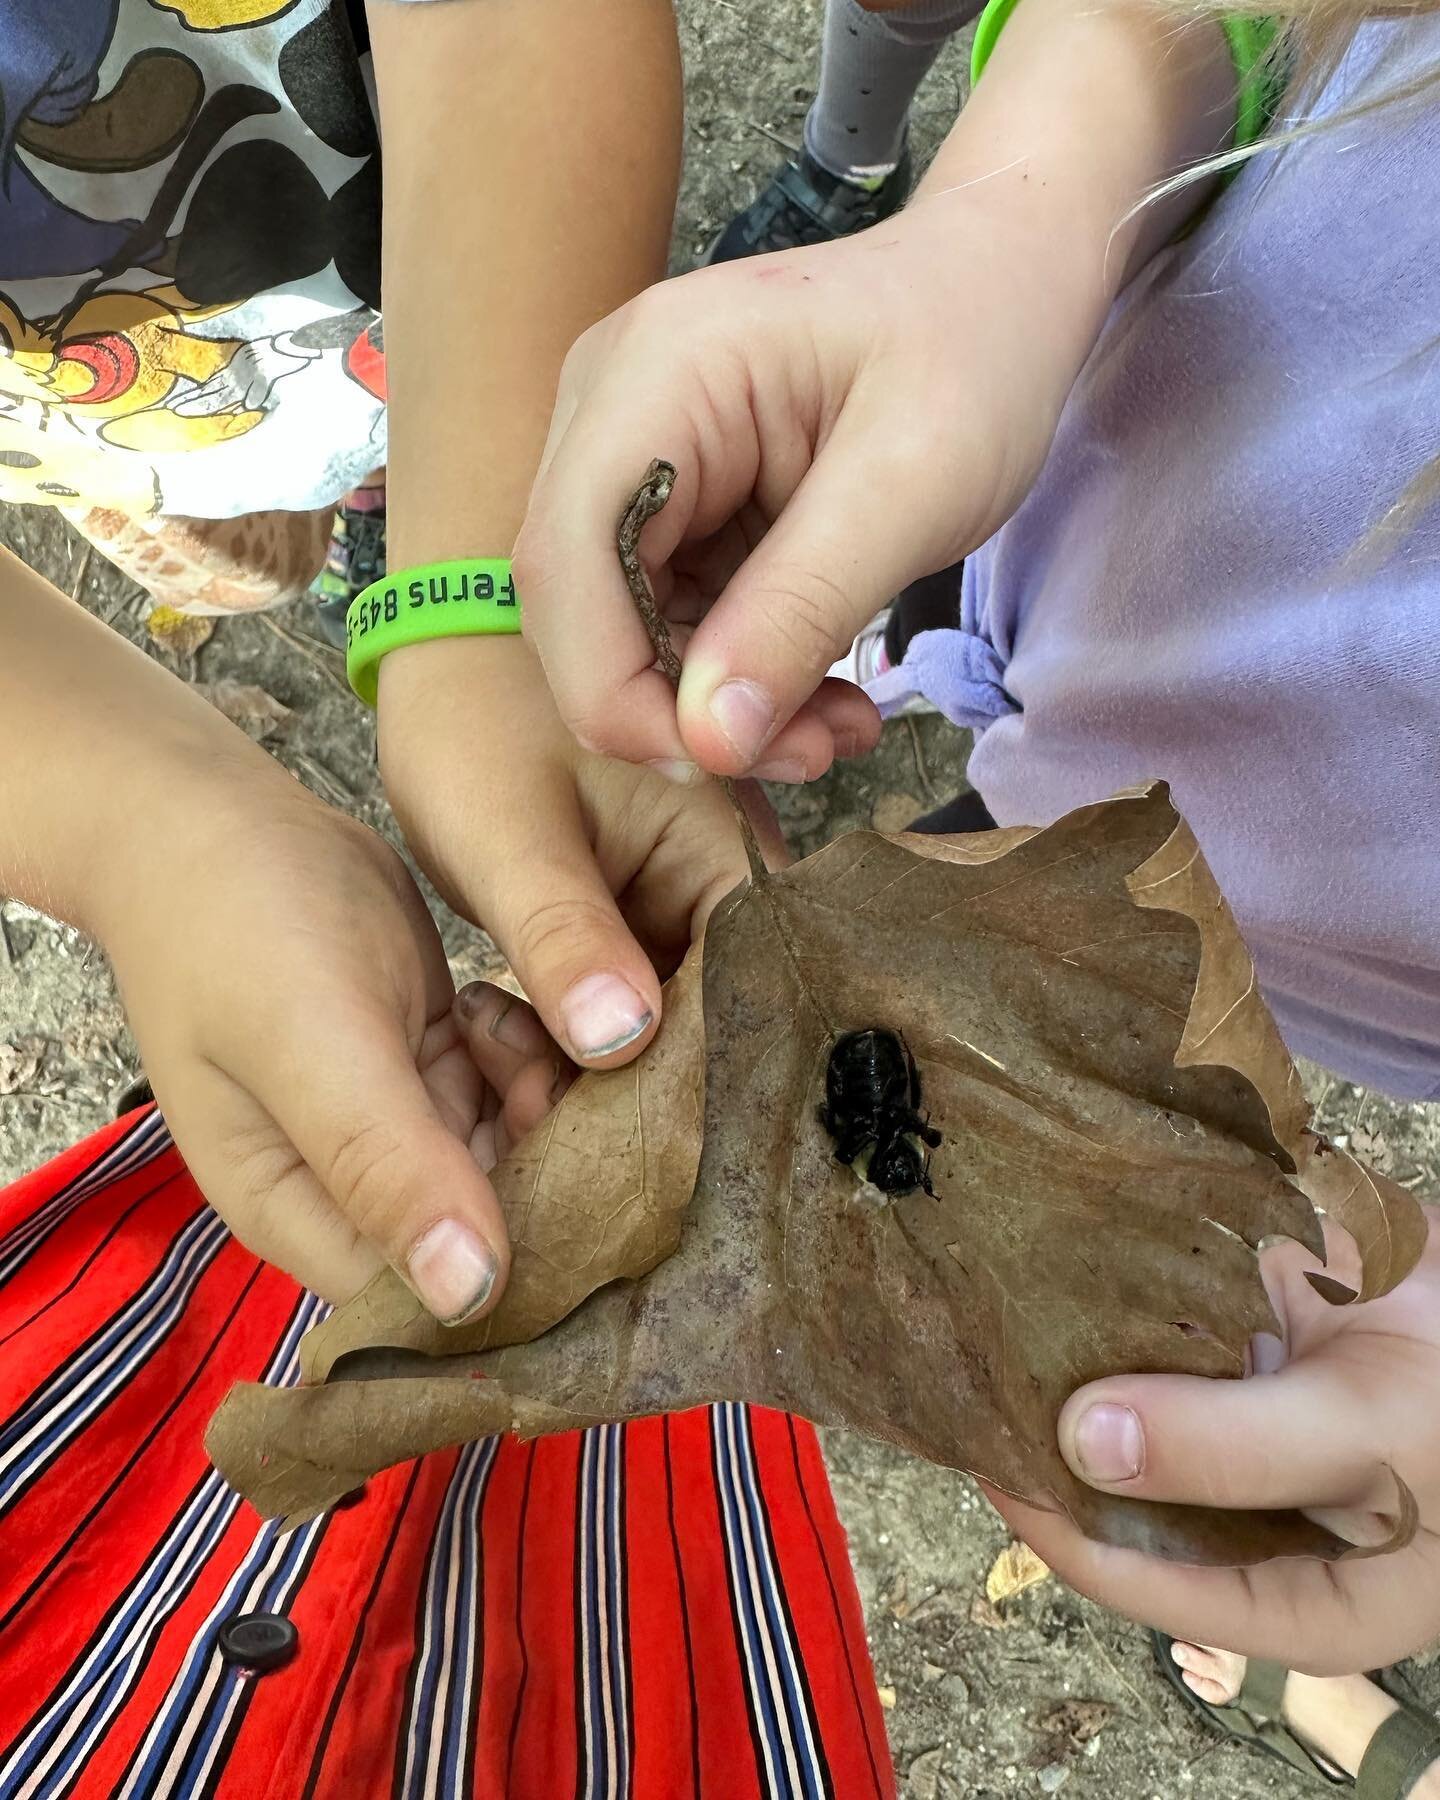 A discovery of a small creature that has already passed. They created a gravesite for her. #childledlearning #natureeducation #naturekids #outdoorplay #forestschool #urbanforestschool #playbasedlearning #natureheals